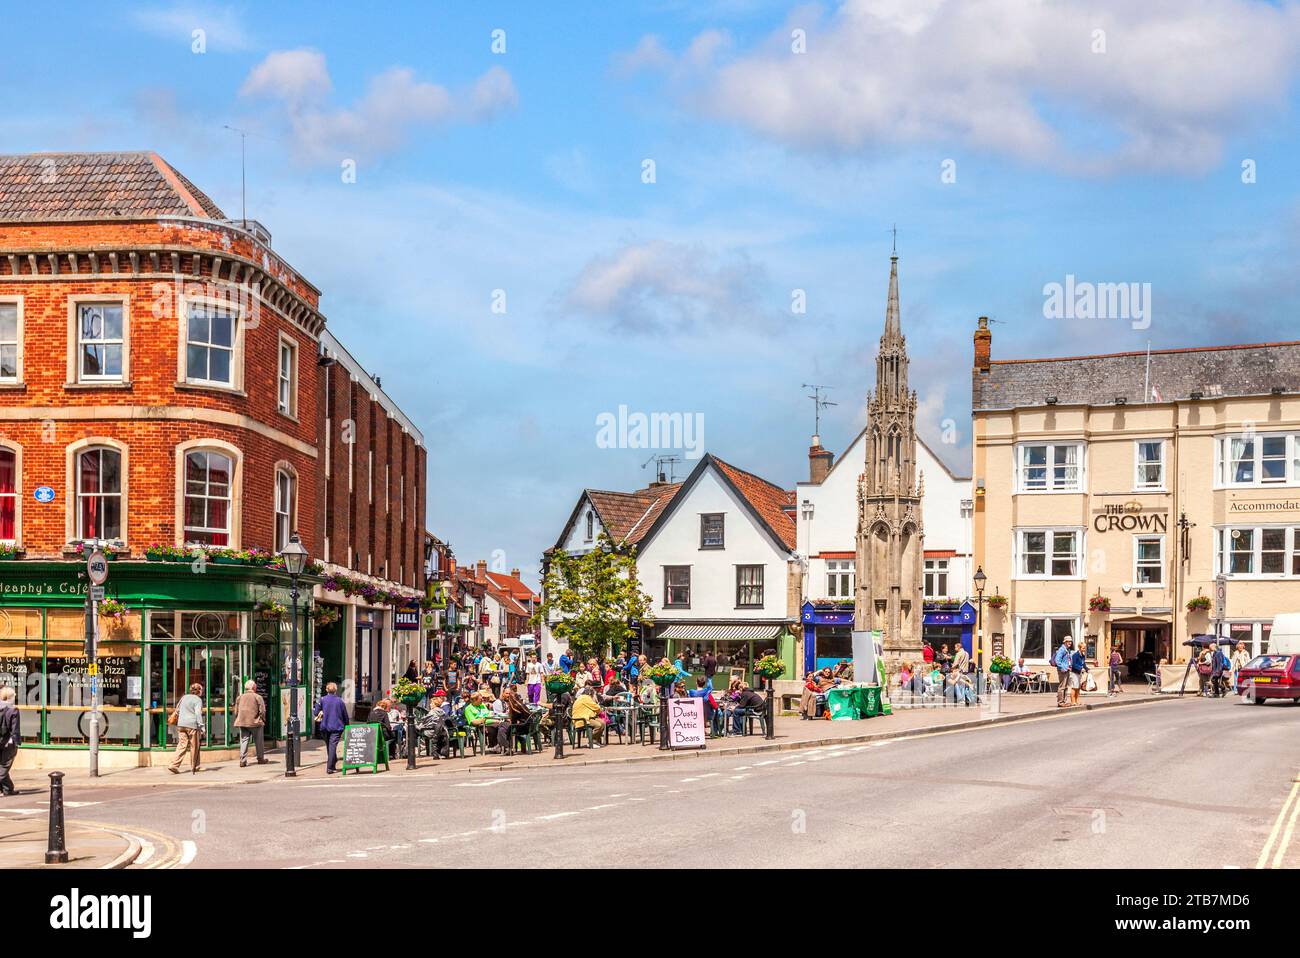 10 June 2011: Glastonbury, Somerset - The centre of Glastonbury on a bright sunny day.  People are seated at a pavement cafe, and shops and a pub... Stock Photo